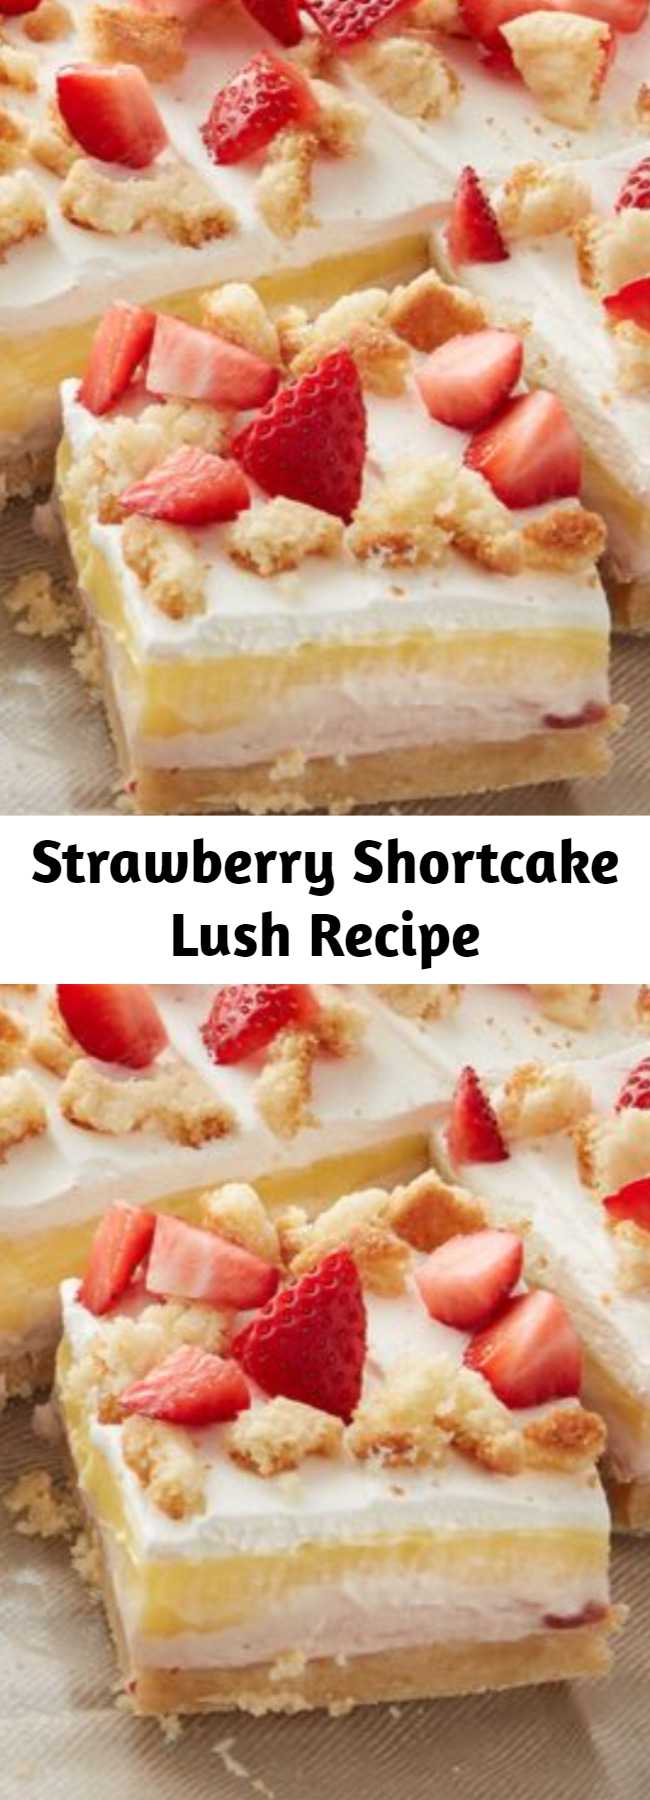 Strawberry Shortcake Lush Recipe - Strawberry shortcake gets a fun makeover that's perfect for sharing with a crowd. With a sugar cookie crust, cool layers of sweet strawberry cream cheese, vanilla pudding and whipped topping, plus a finishing sprinkle of fresh strawberries, it's summer in a dessert! #dessert #summer